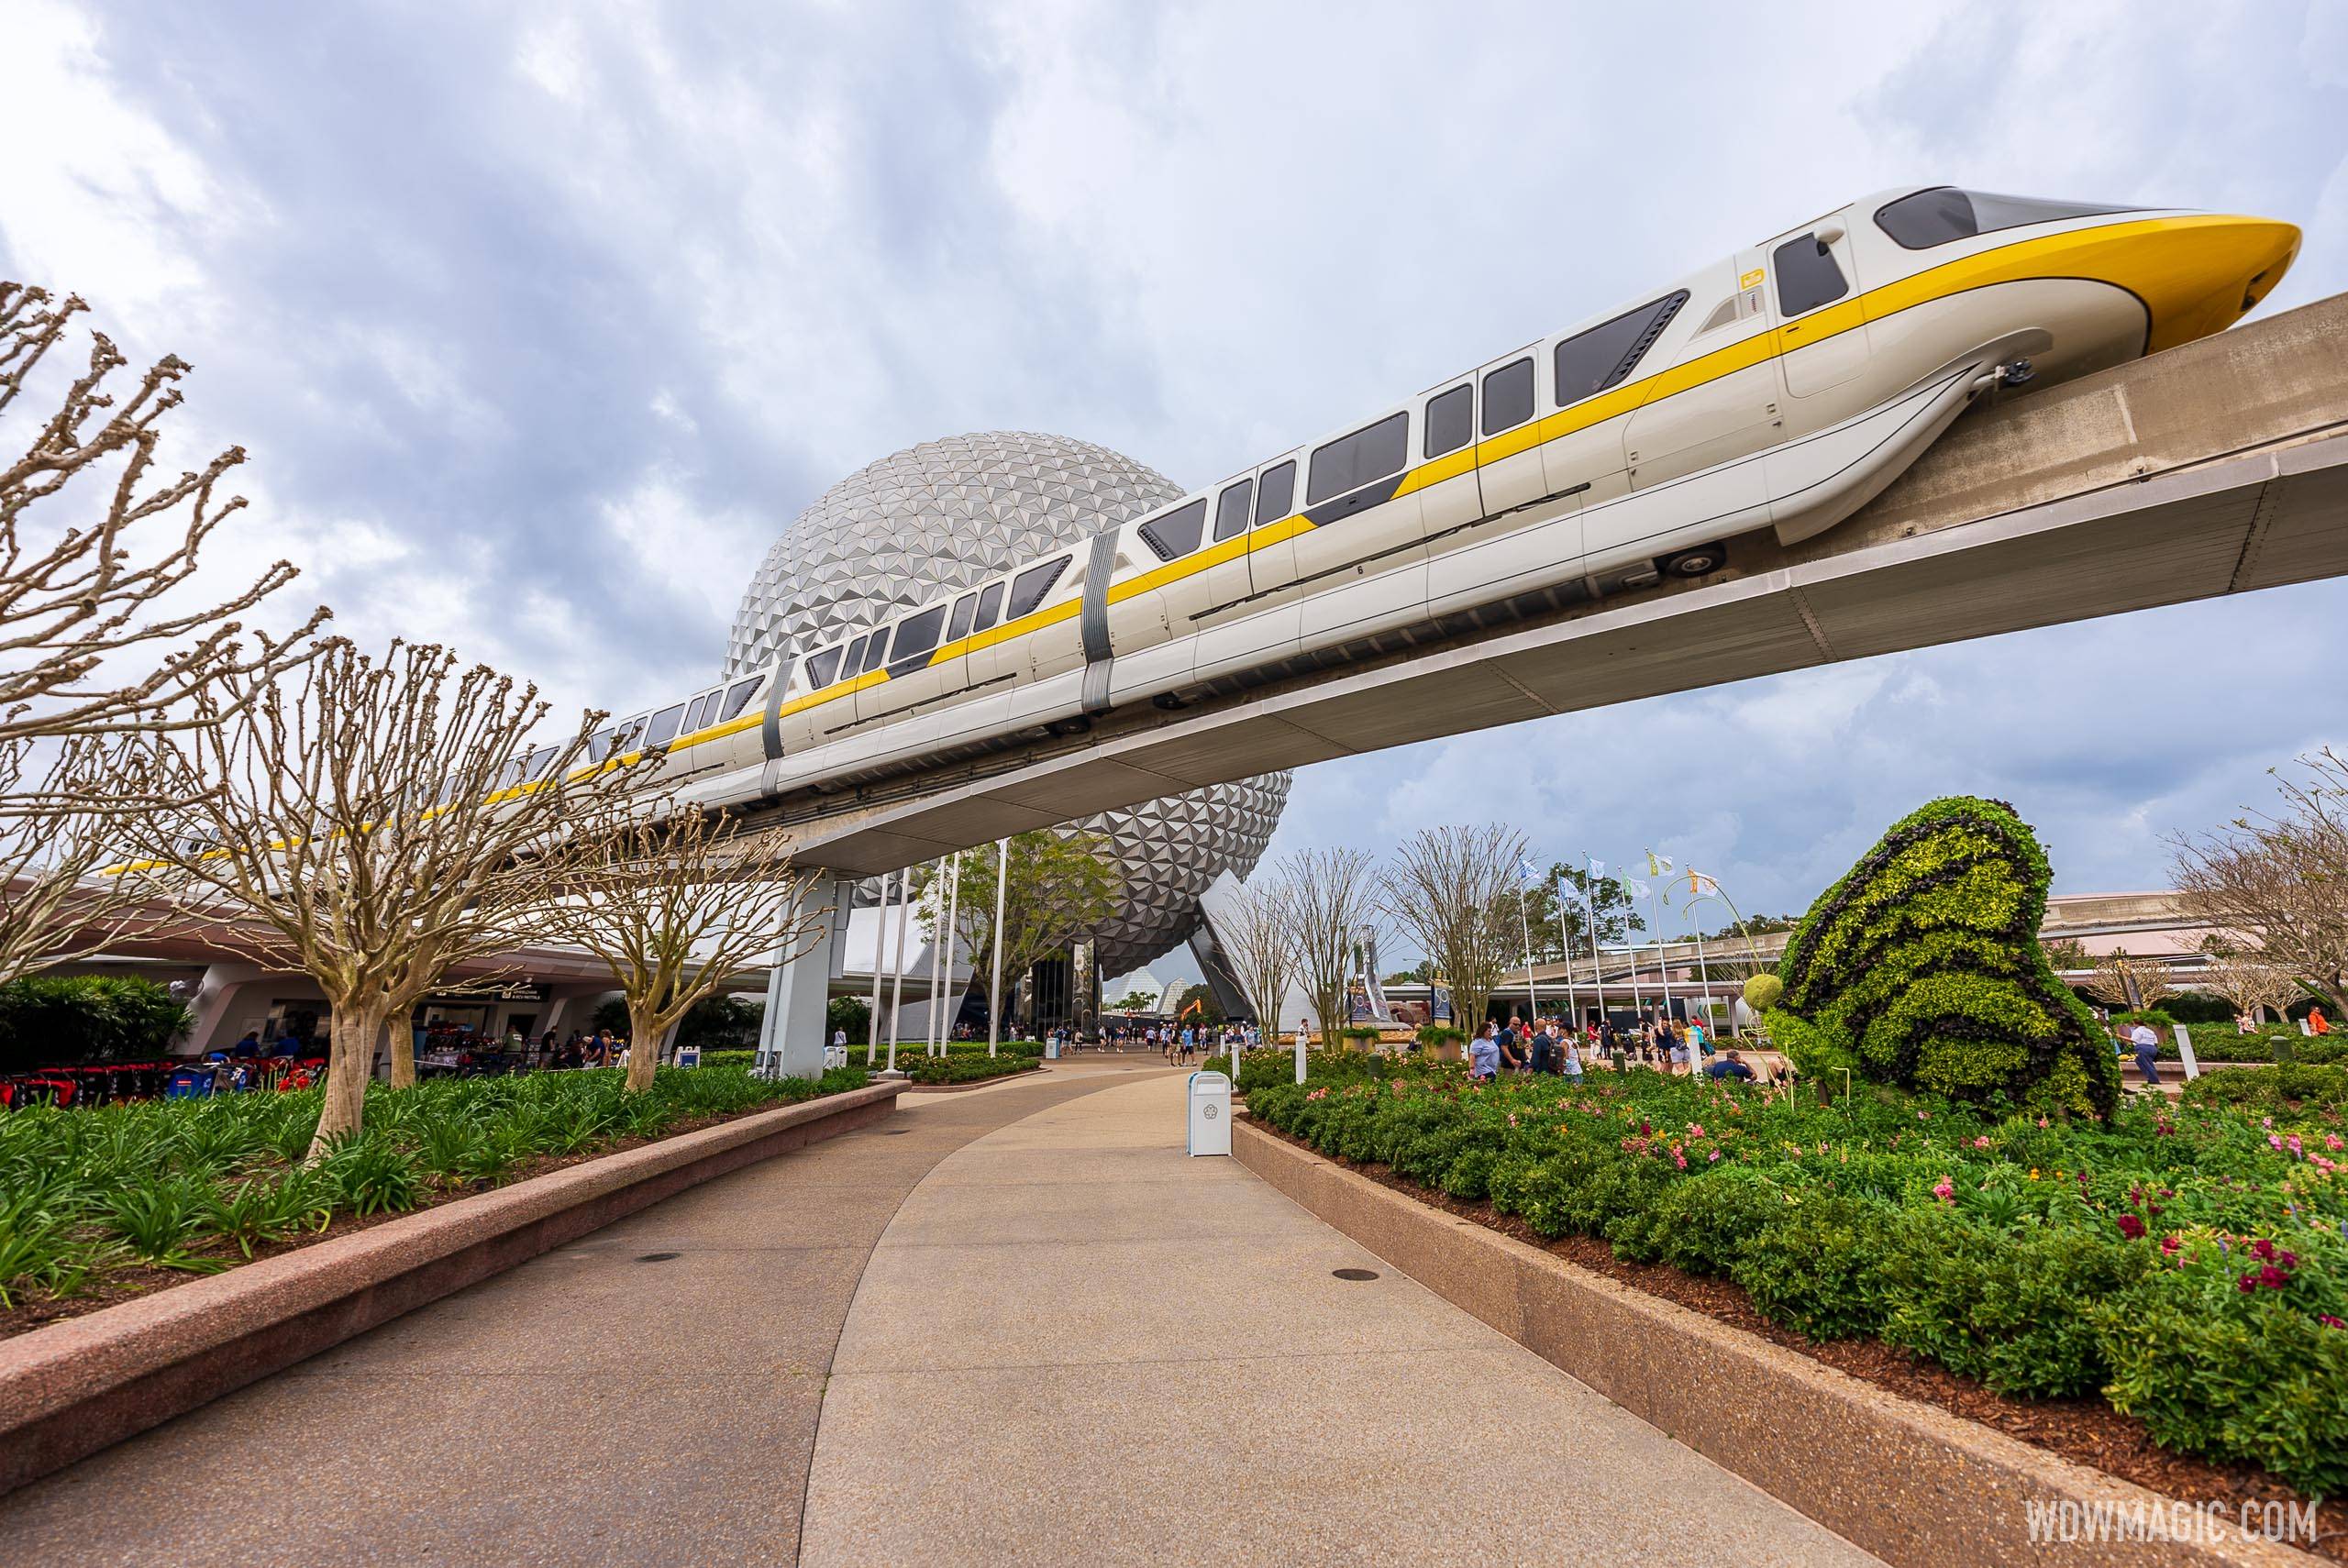 Monorail Yellow refurbished - March 2021